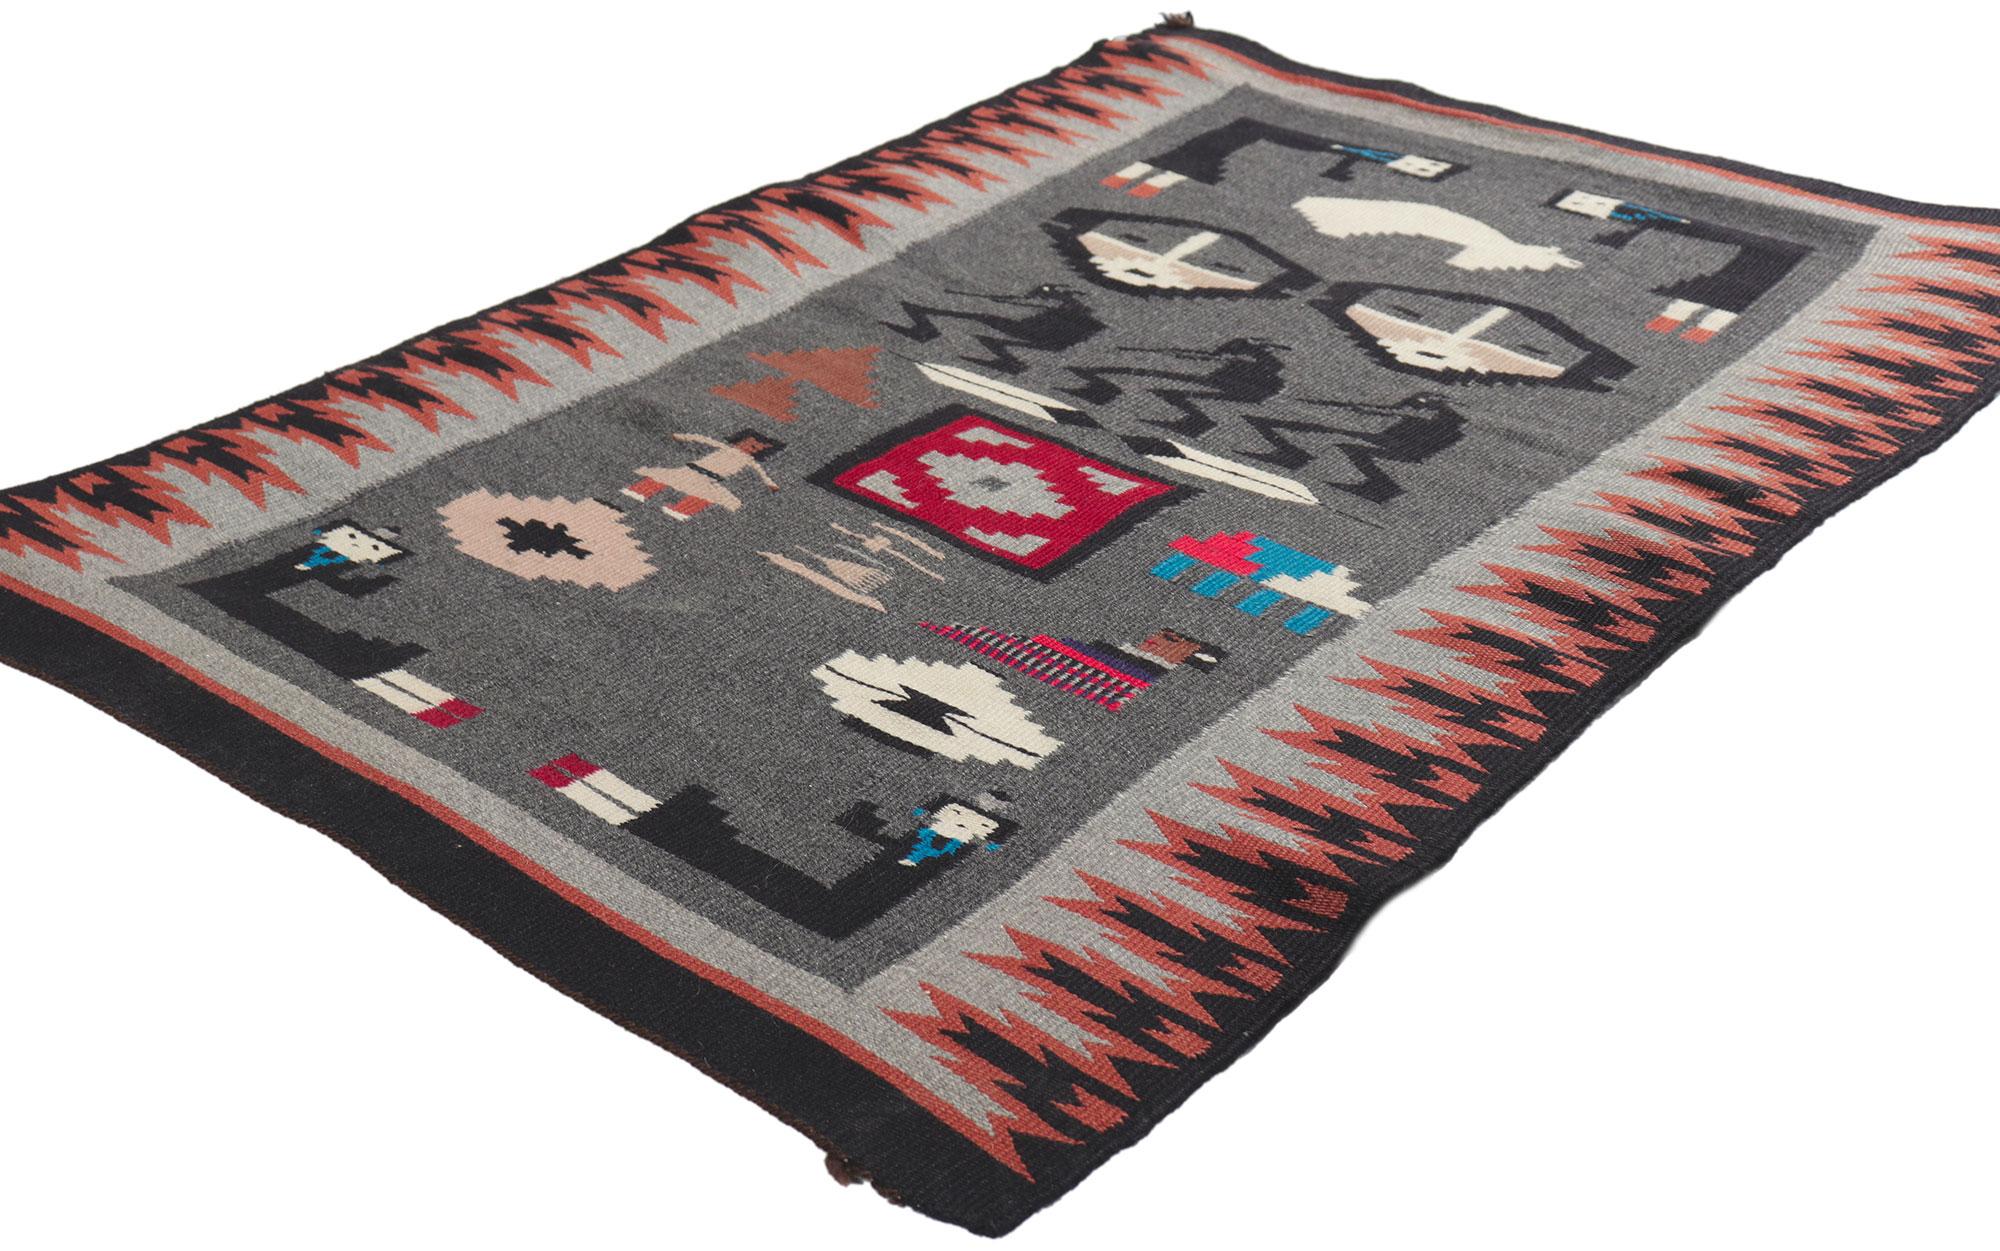 78425 Vintage Navajo Pictorial Rug, 02'02 x 03'02. Full of tiny details and an expressive design, this handwoven wool vintage Navajo pictorial rug is a captivating vision of woven beauty. The abrashed gray field features a variety of ambiguous